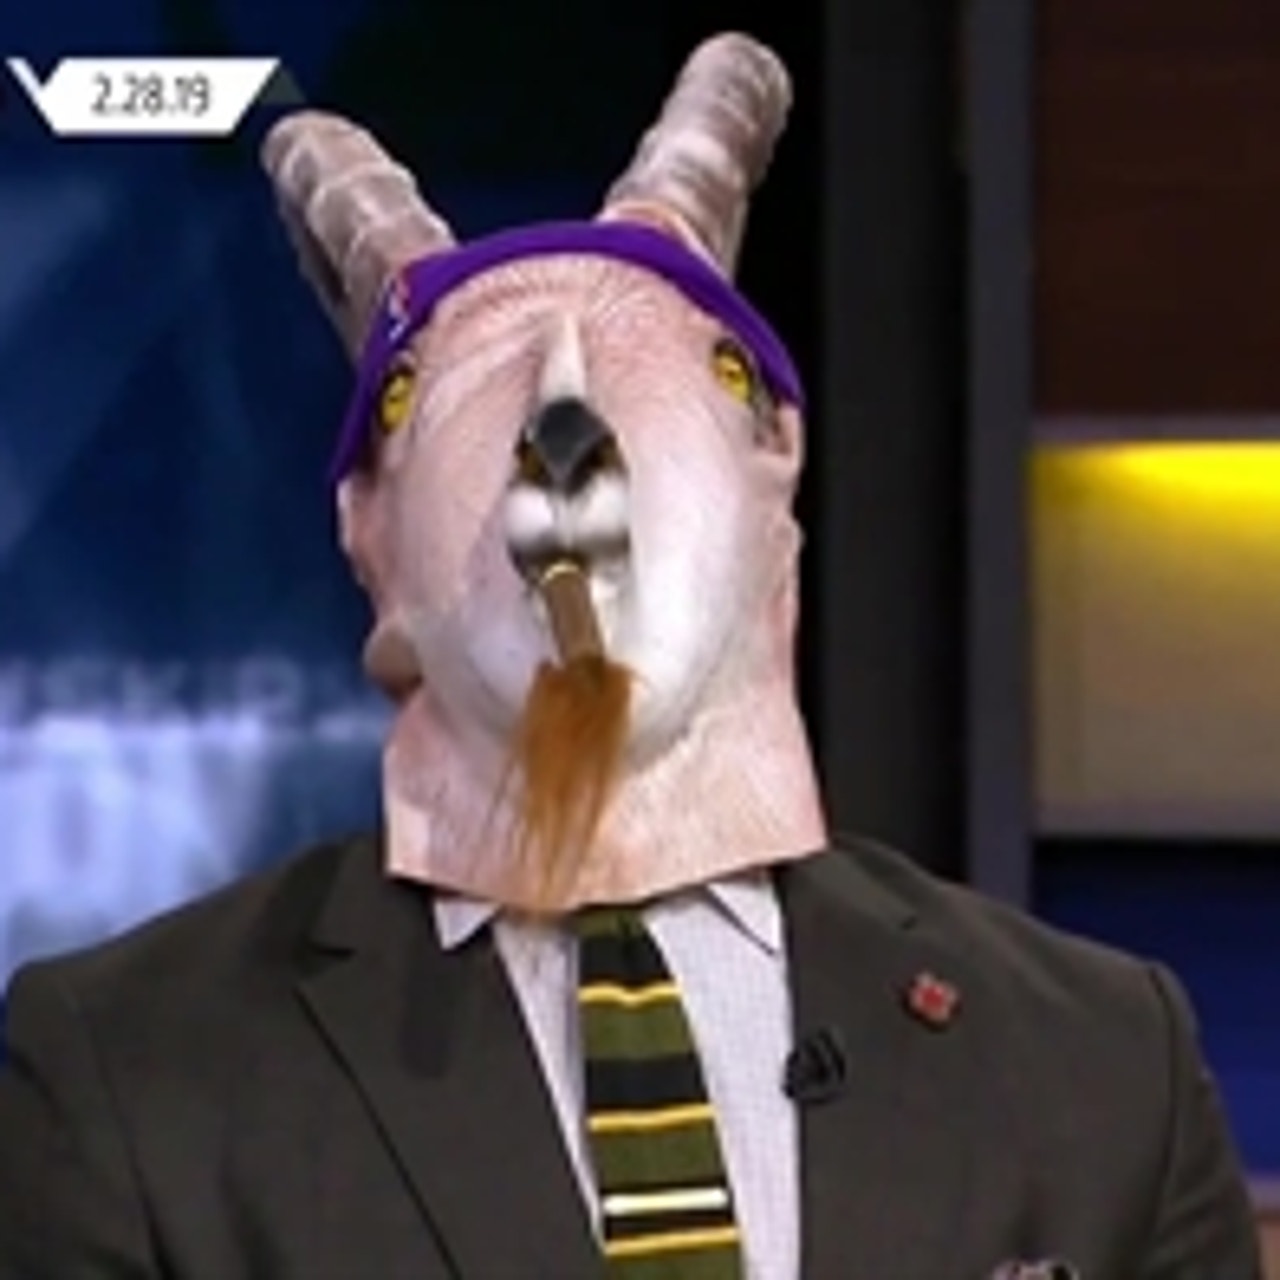 Shannon Sharpe Dresses As GOAT James On Undisputed: Watch